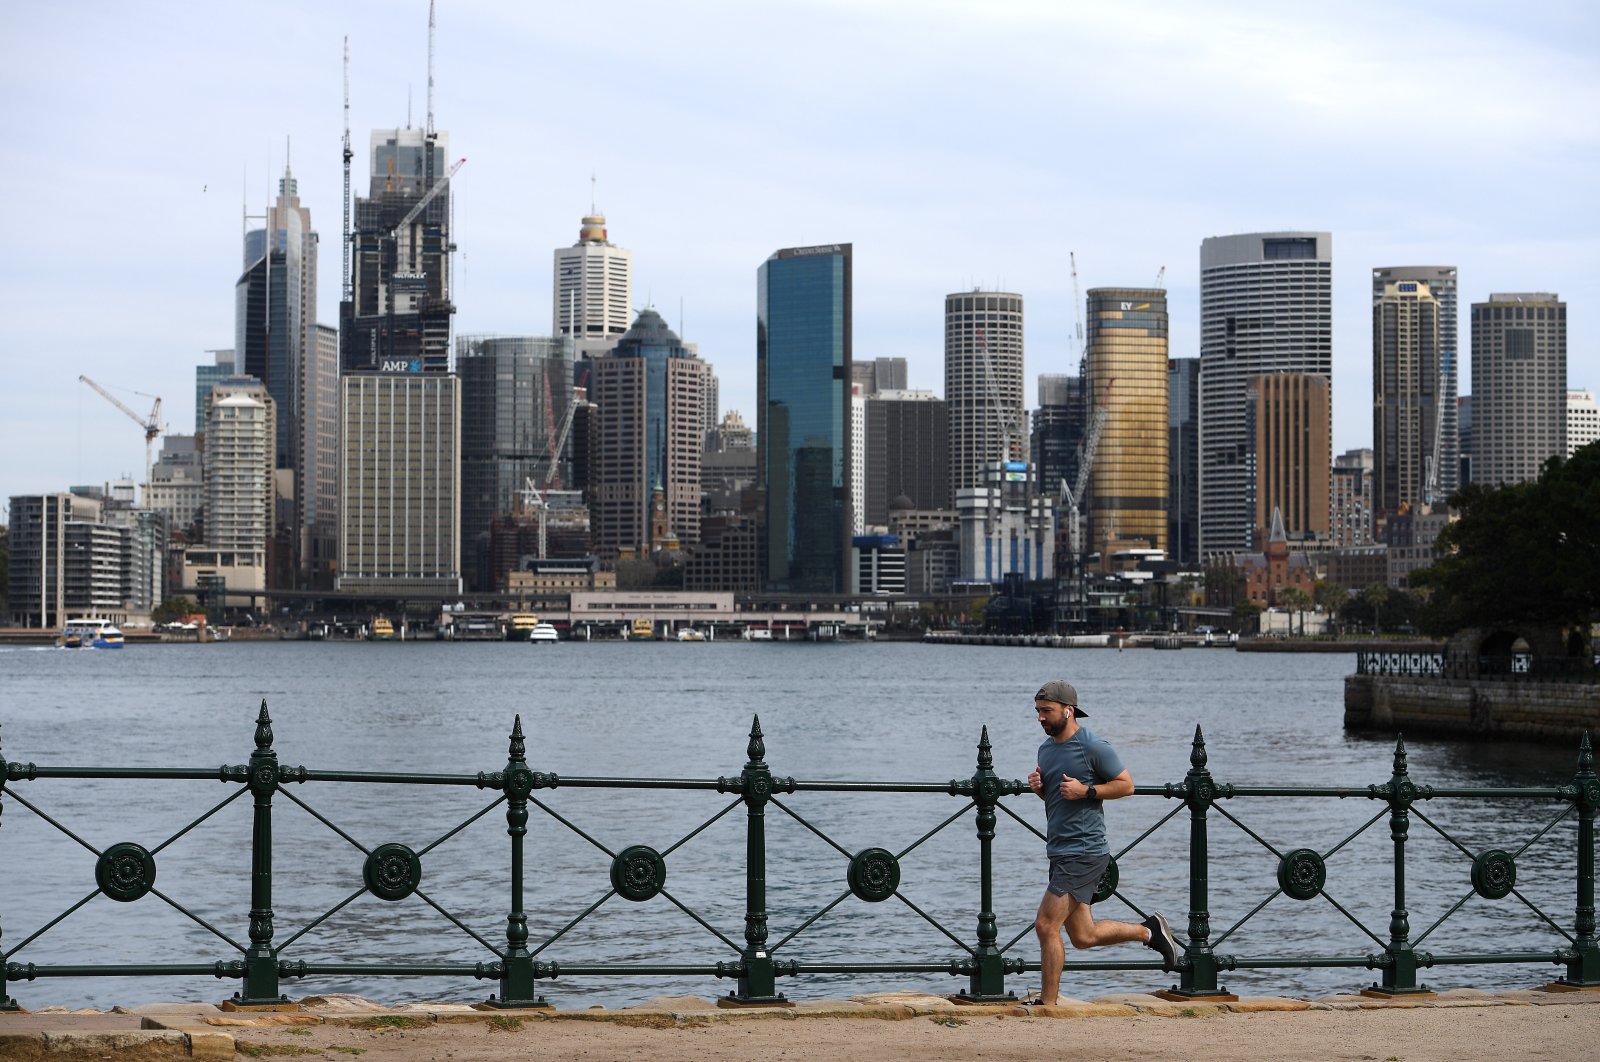 A man jogs in view of the city skyline in Sydney, Australia, Sept. 02, 2020. (EPA Photo)